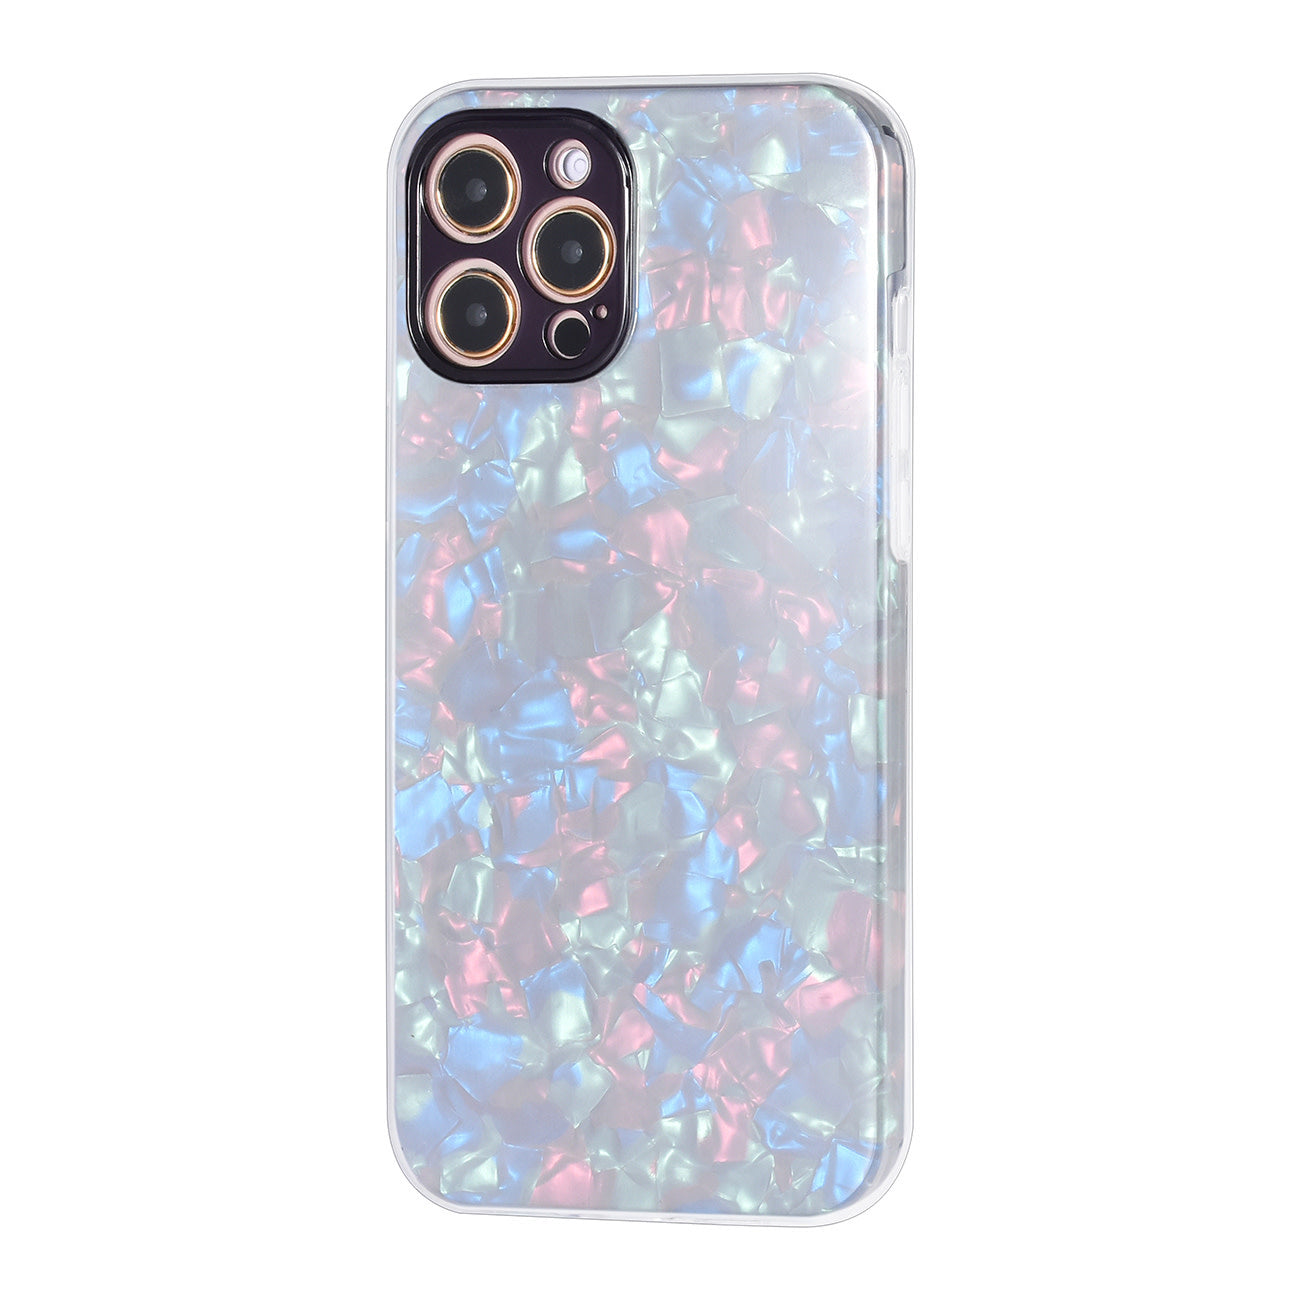 iPhone 12 PRO MAX Backcover - Heartshaped Popsocket